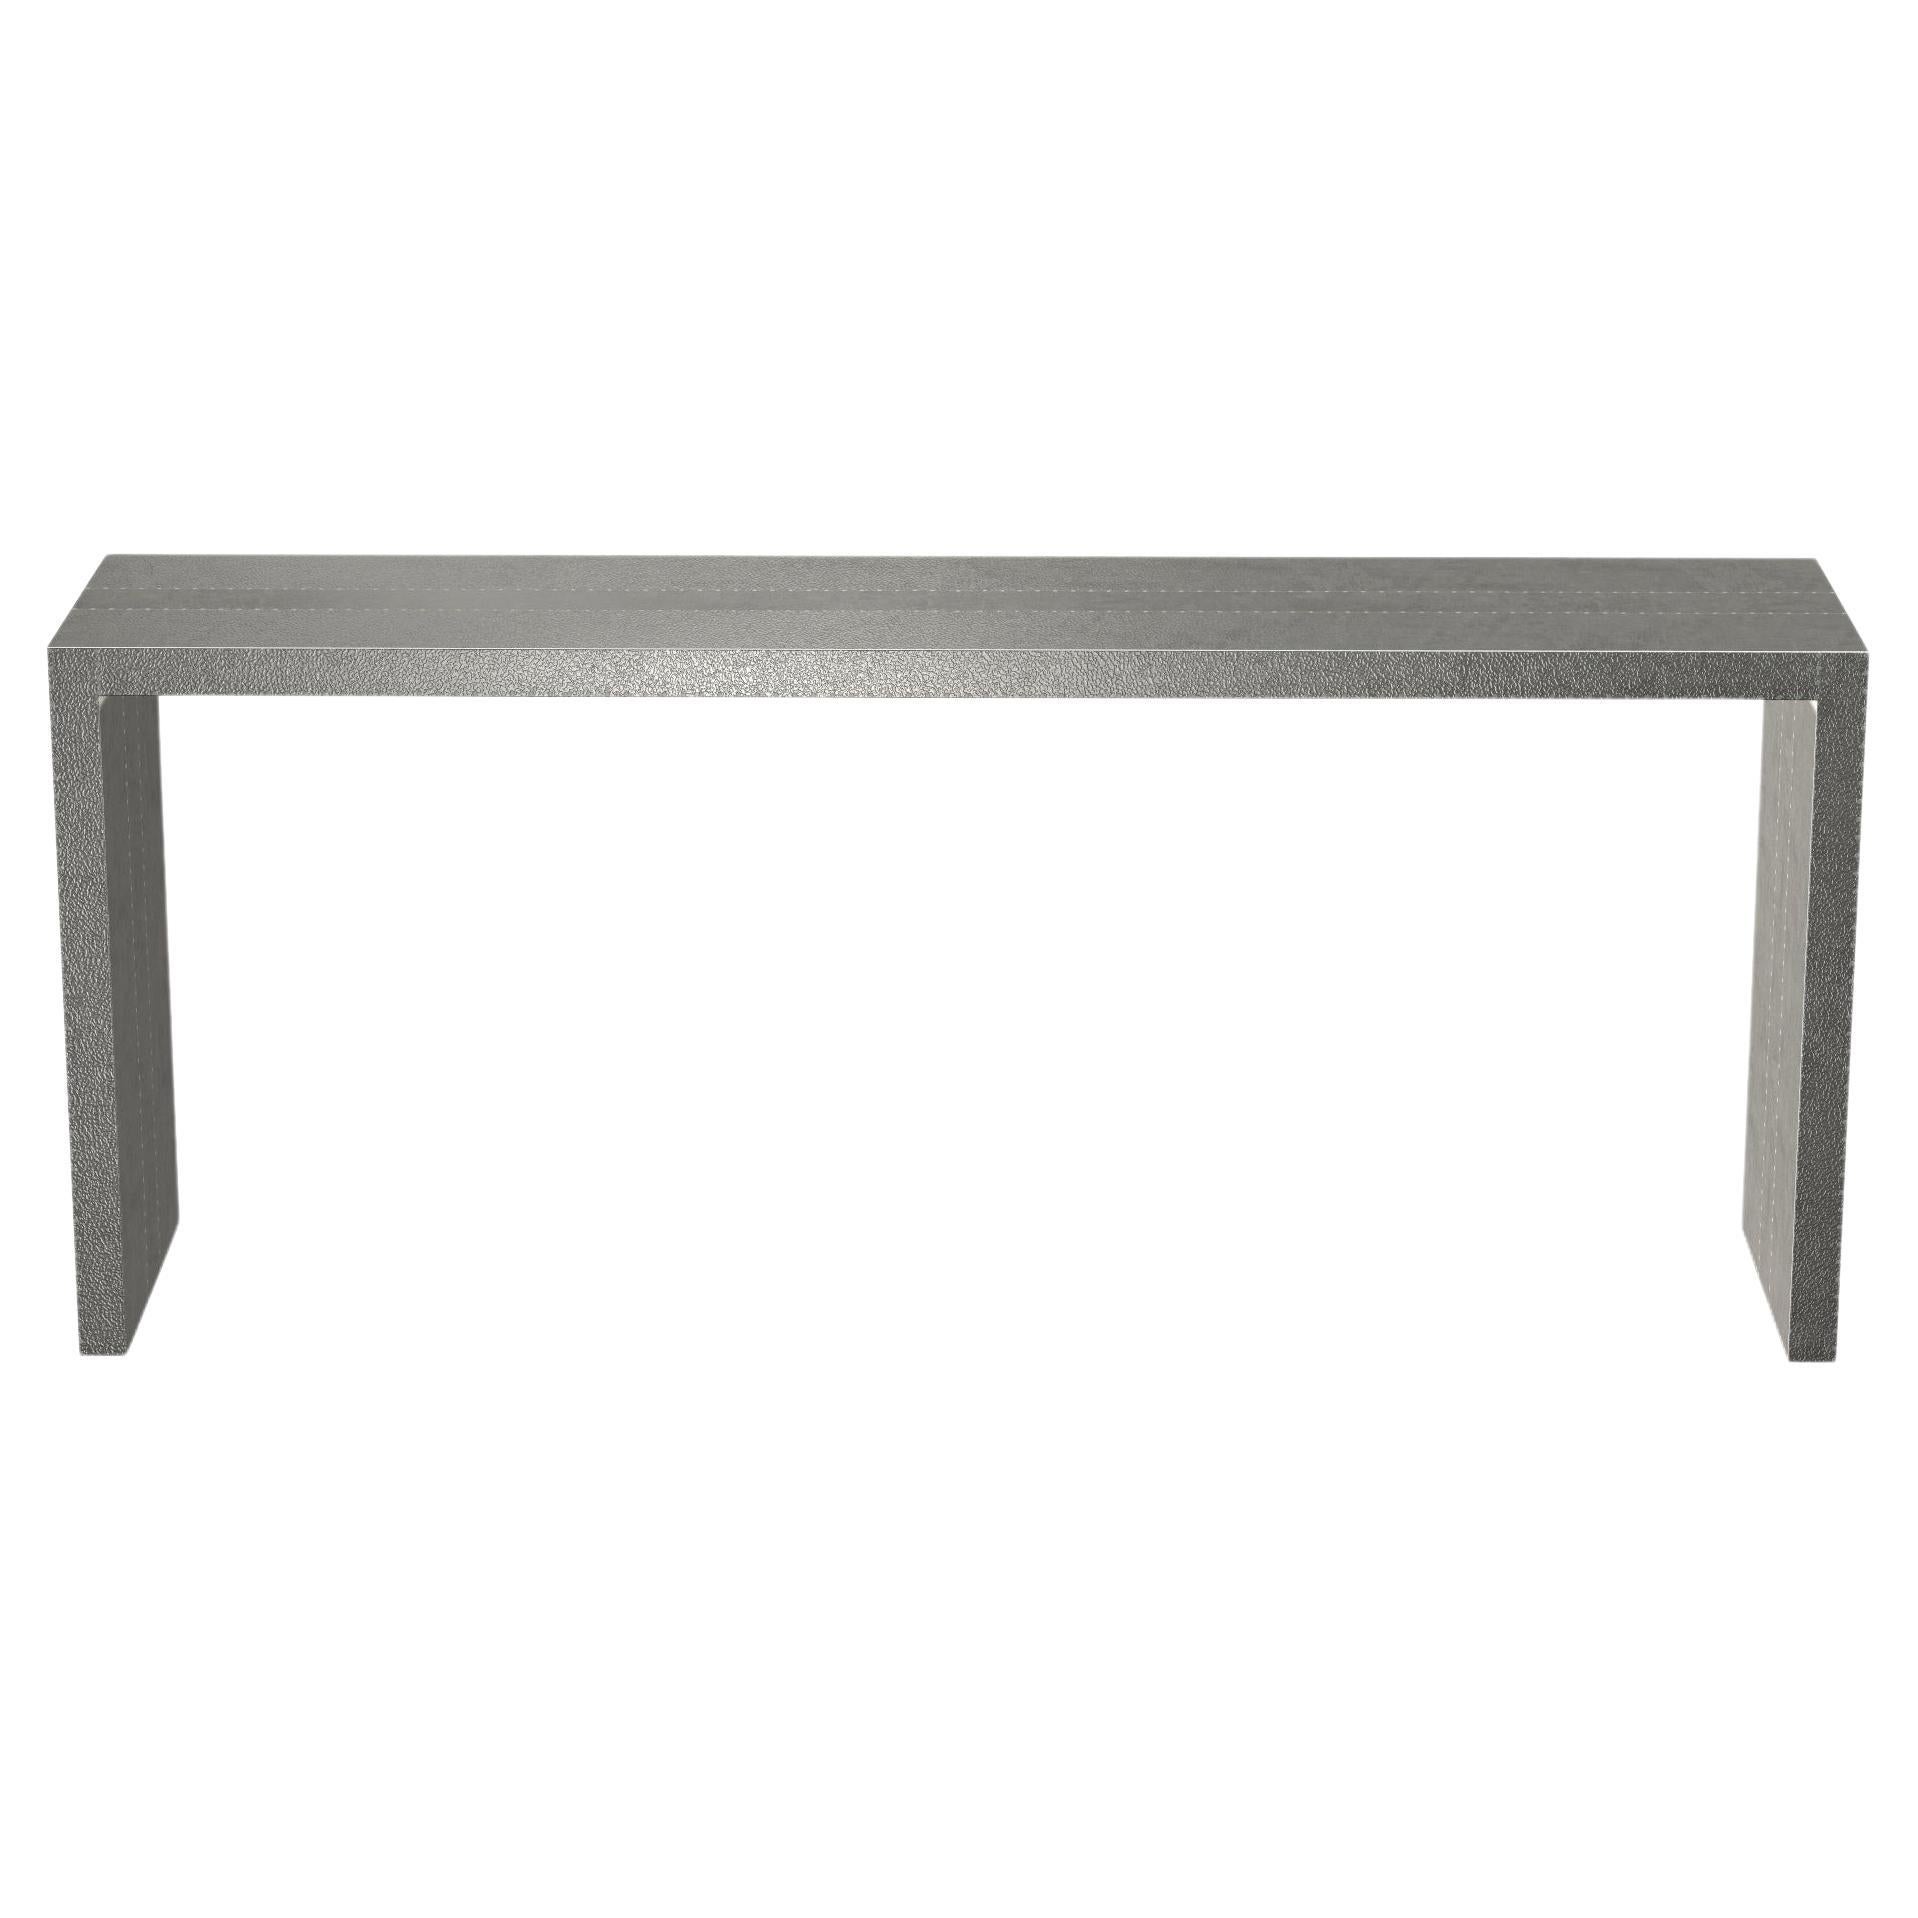 Art Deco Rectangular Console Tables Fine Hammered White Bronze by Alison Spear For Sale